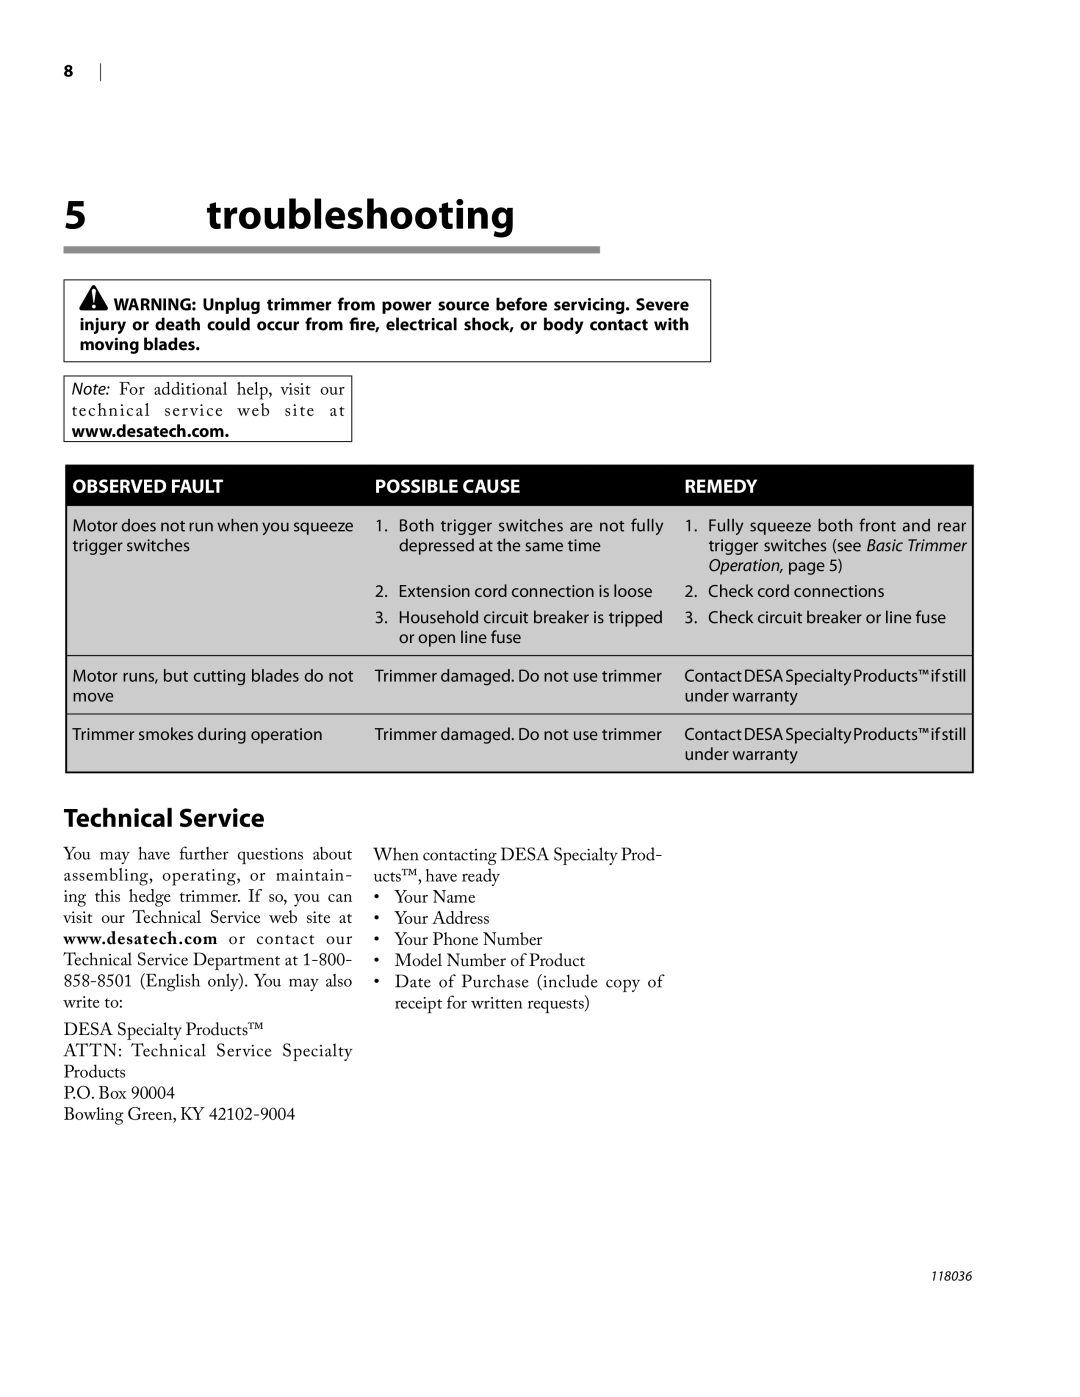 Remington Power Tools HT3218A, HT4022A troubleshooting, Technical Service, Observed Fault, Possible Cause, Remedy 